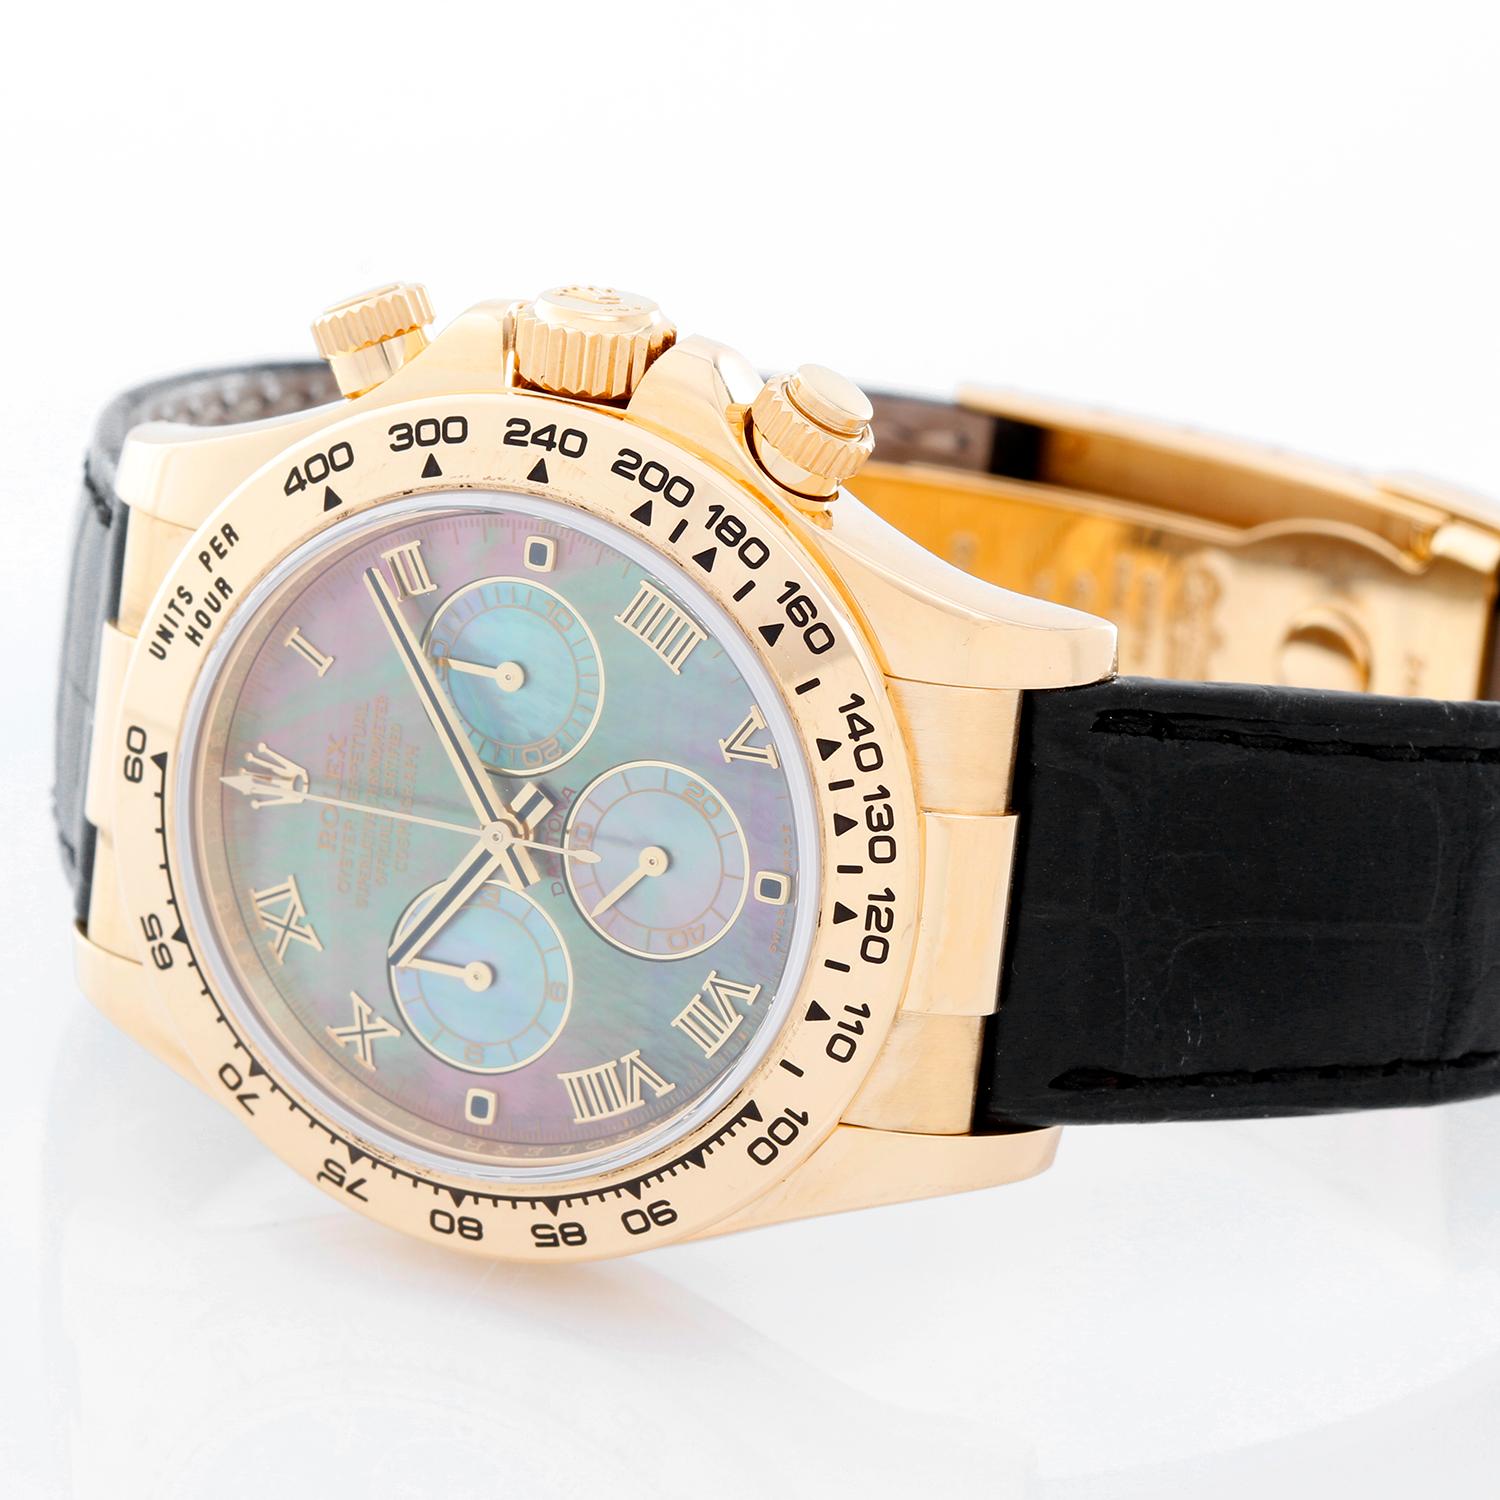 Rolex Cosmograph Daytona Gold Men's Watch Mother of Pearl Roman 116518 - Automatic winding, chronograph, 44 jewels, sapphire crystal. 18k yellow gold case and bezel  (40mm diameter). Genuine Rolex Tahitian mother of pearl dial with gold Roman